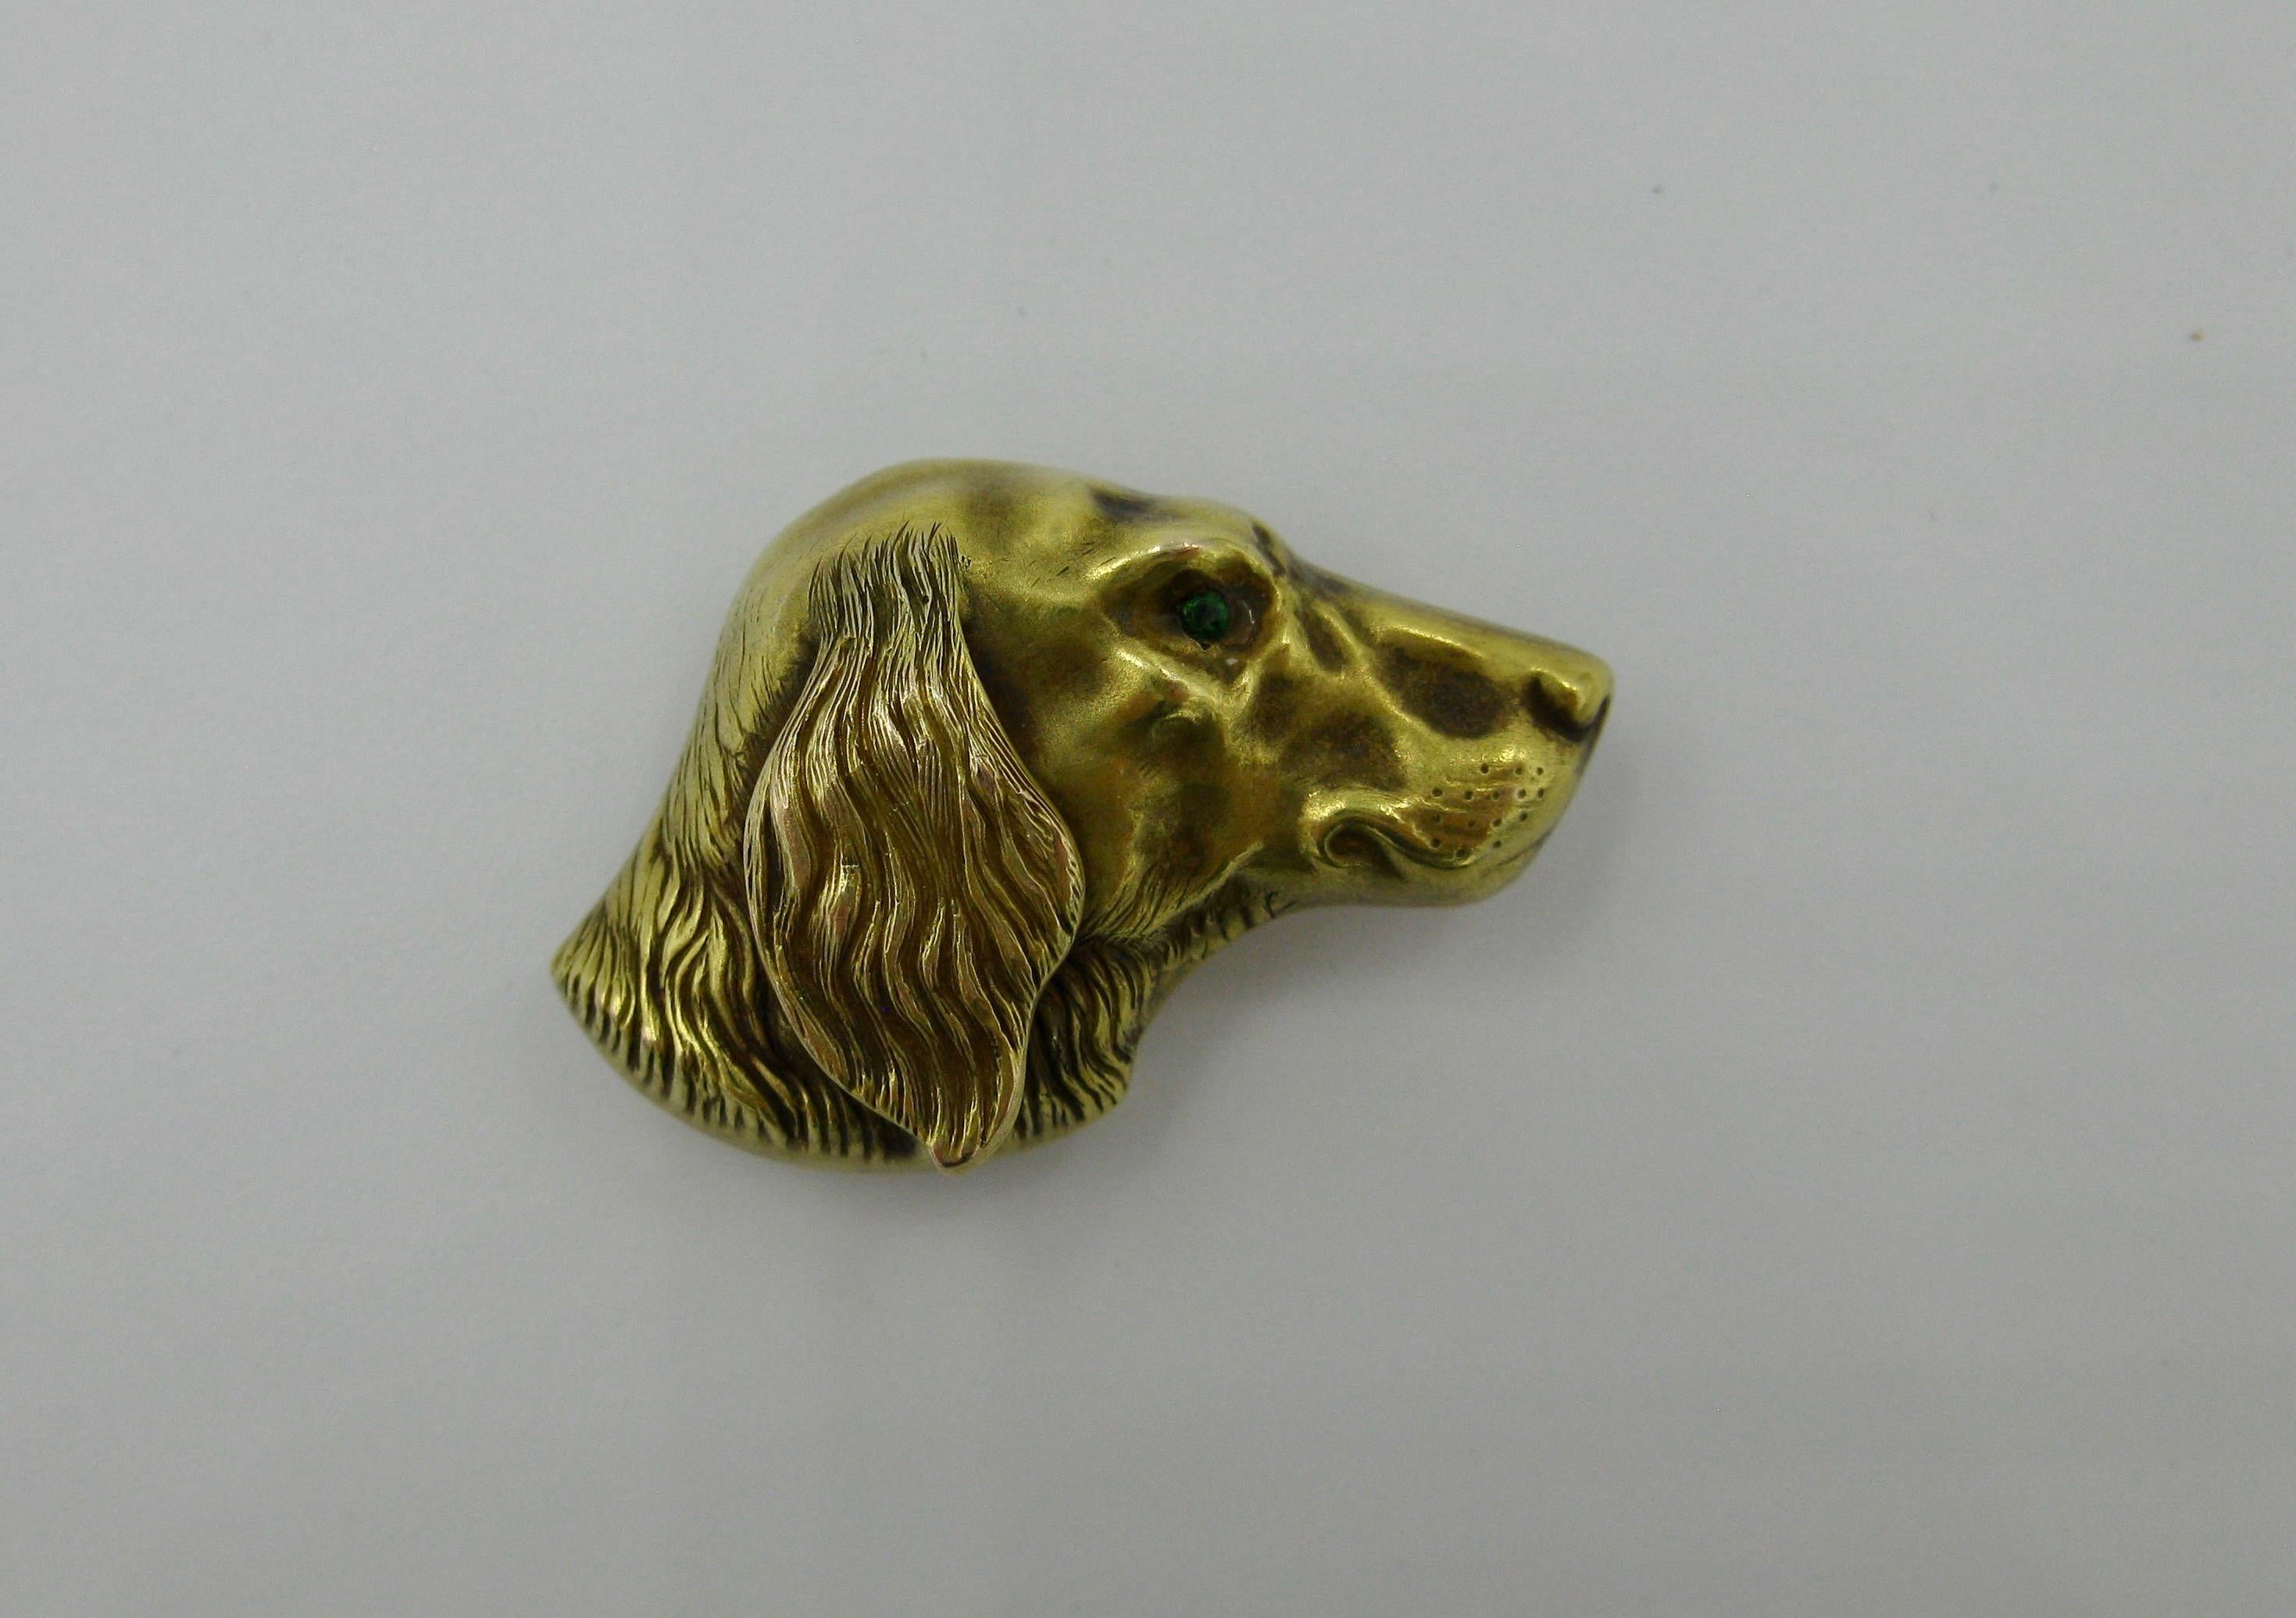 A very special Golden Retriever Dog Brooch Watch Pin in 14 Karat Gold with an Emerald eye.  Dating to the Victorian period and made by the esteemed Riker Bros.  It is so very rare to find antique jewelry depicting Golden Retriever dogs! The design